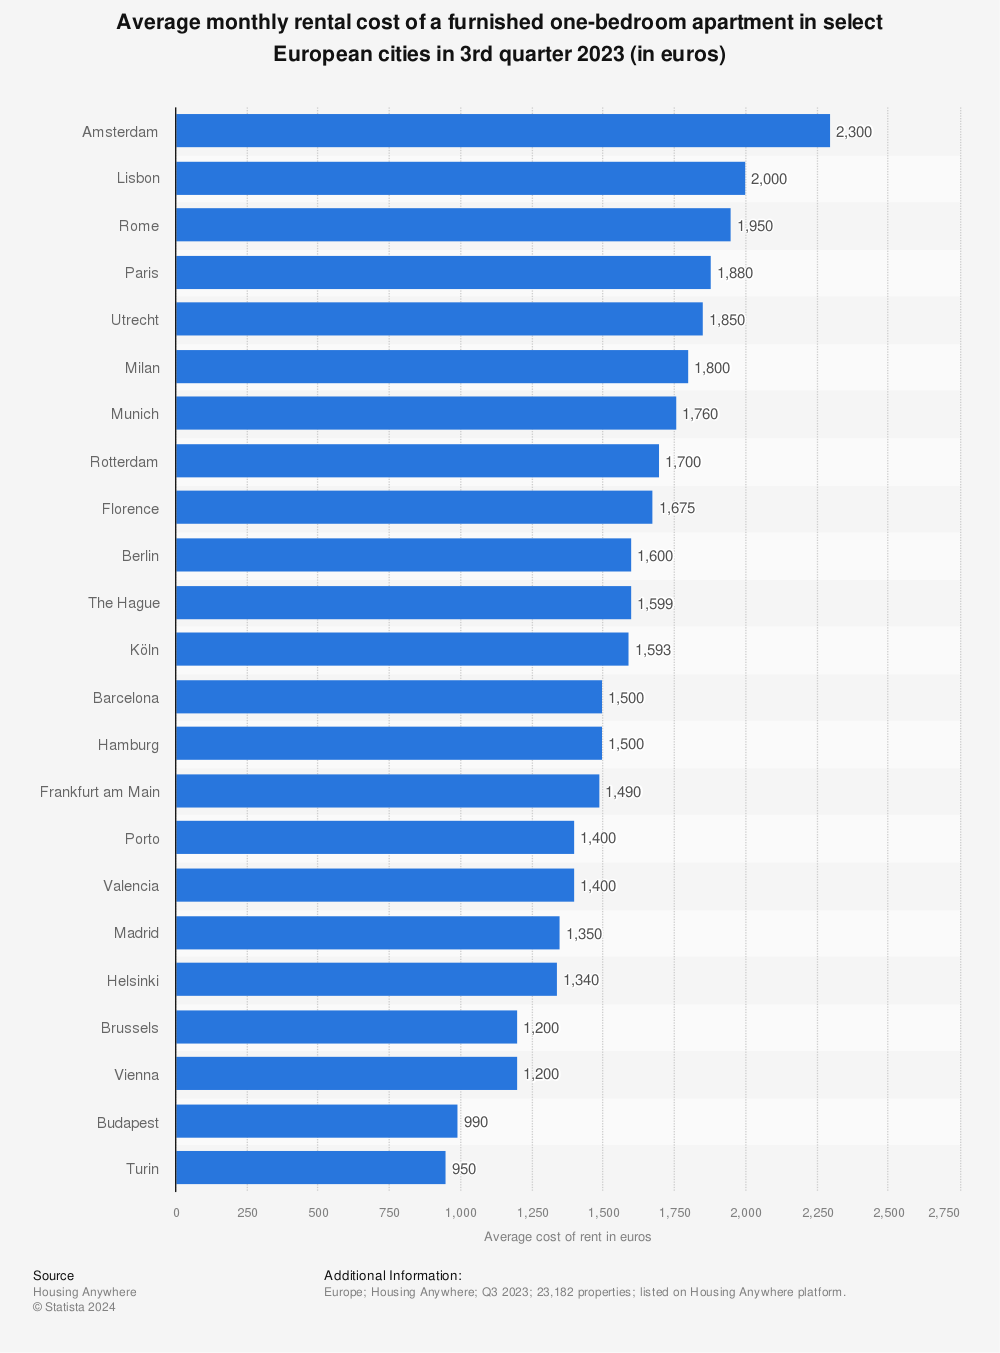 Average Apartment Rental Cost Europe By City 2020 Statista